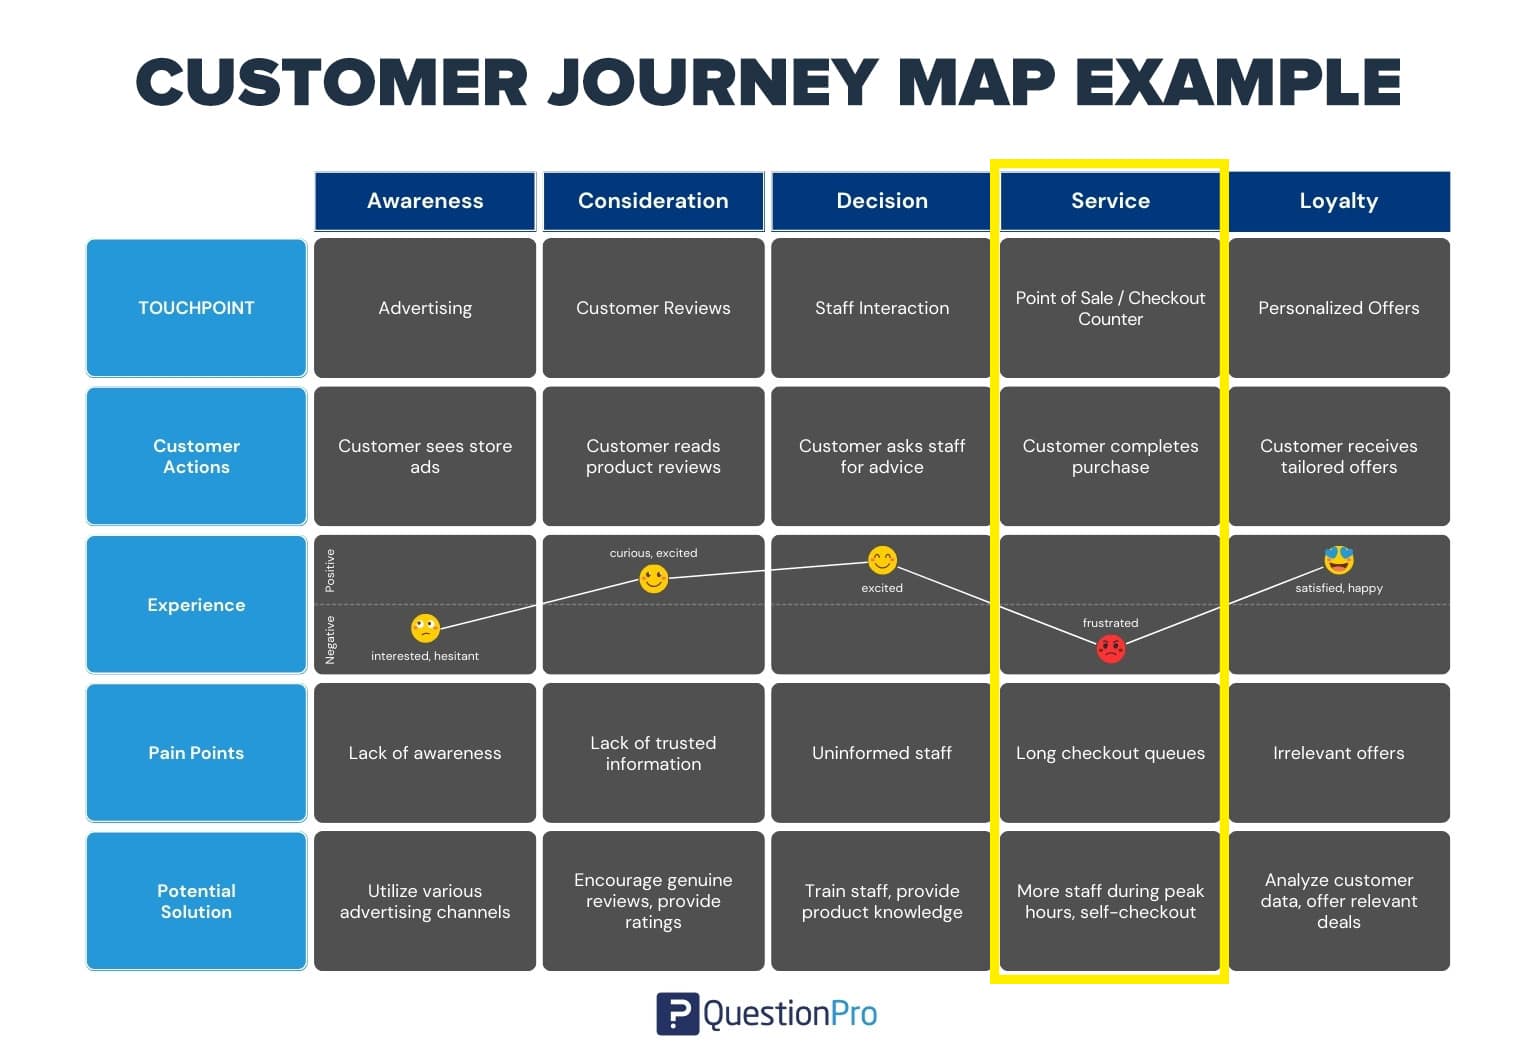 Square Feedback: Its Importance in Your Business's Customer Journey